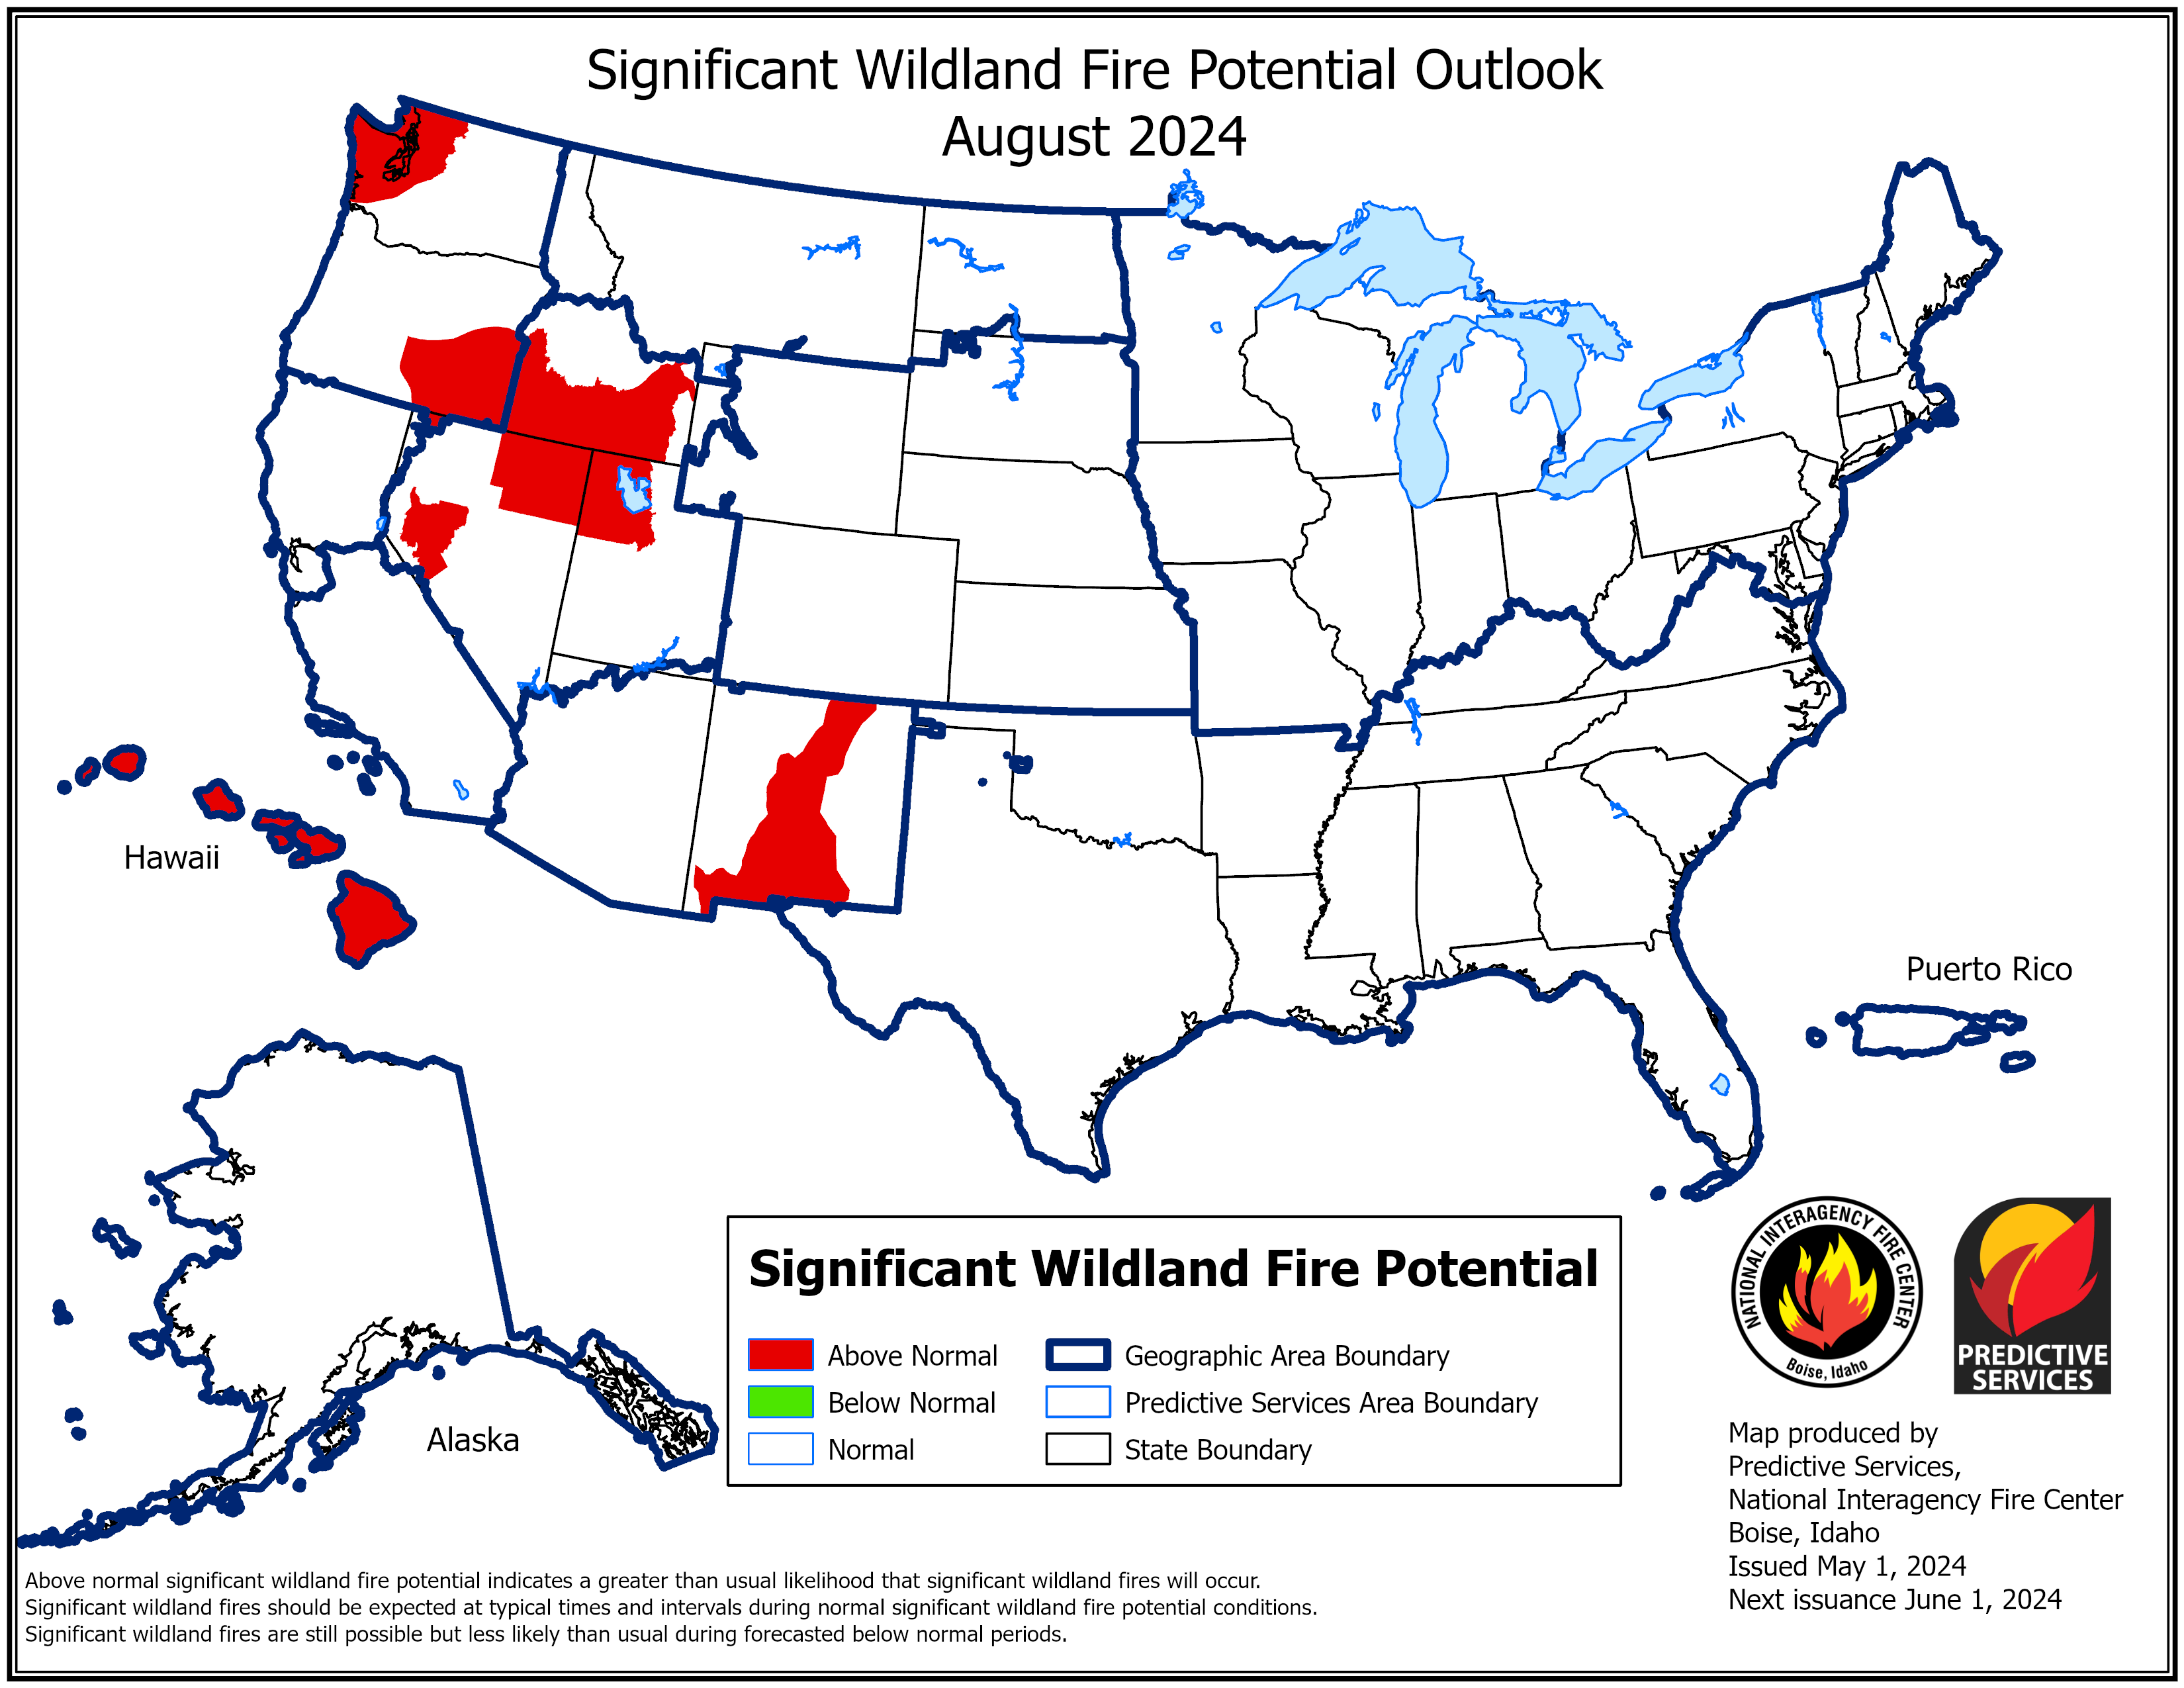 Map of significant fire potential for the US for August